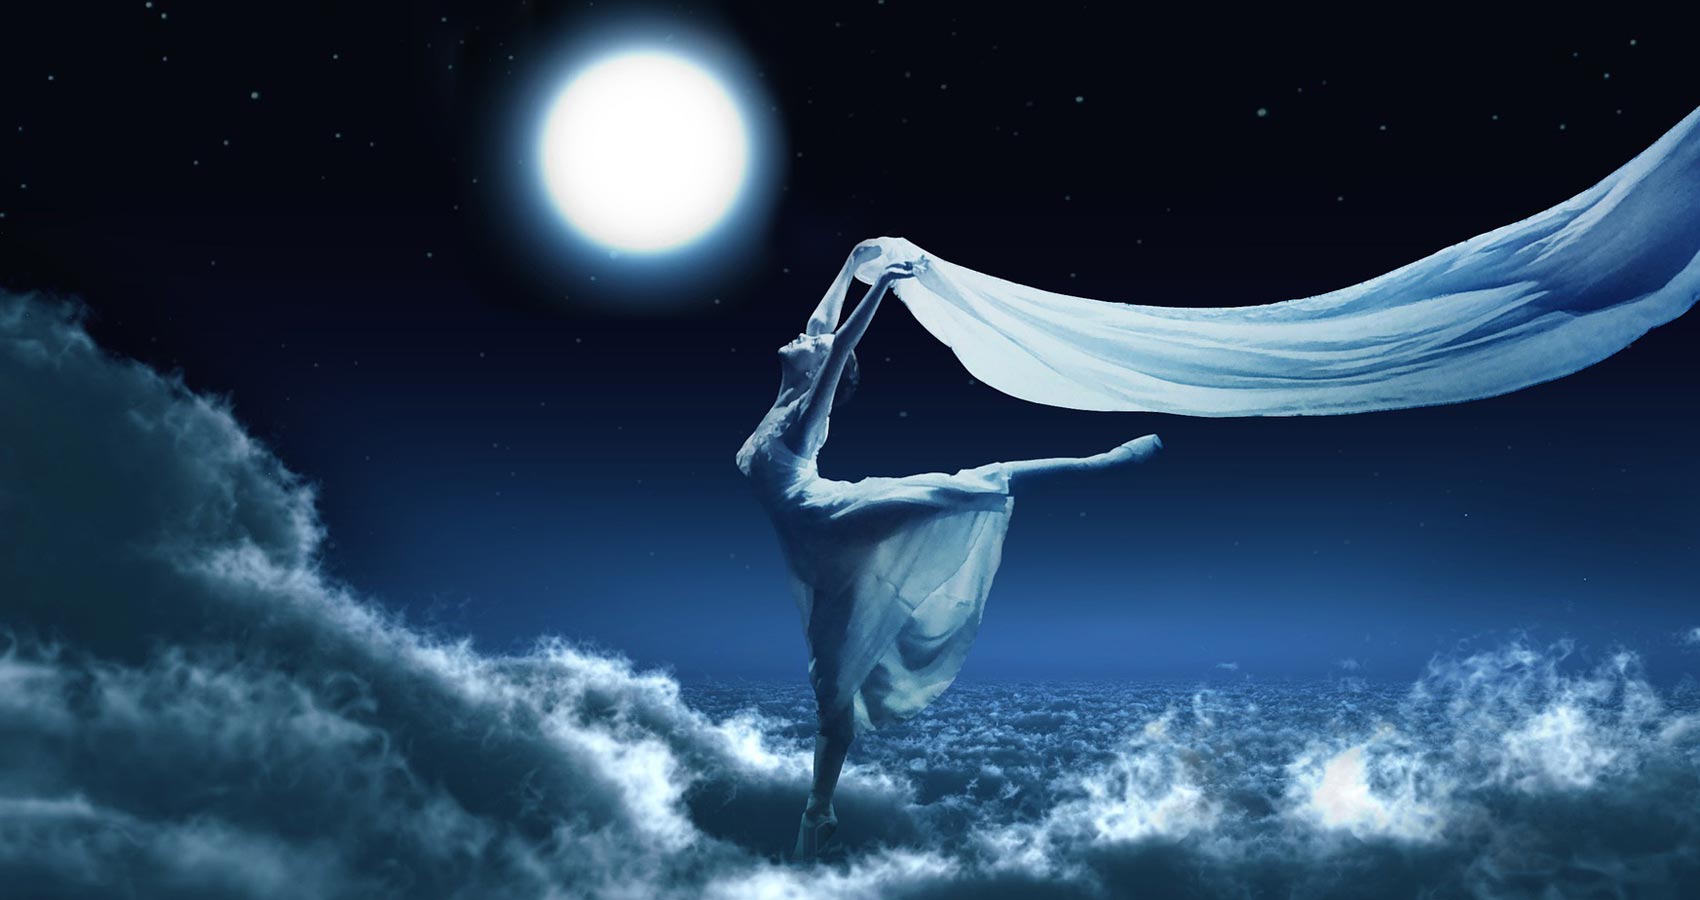 Moon of A Dancer, a poem by Theodora Oniceanu at Spillwords.com